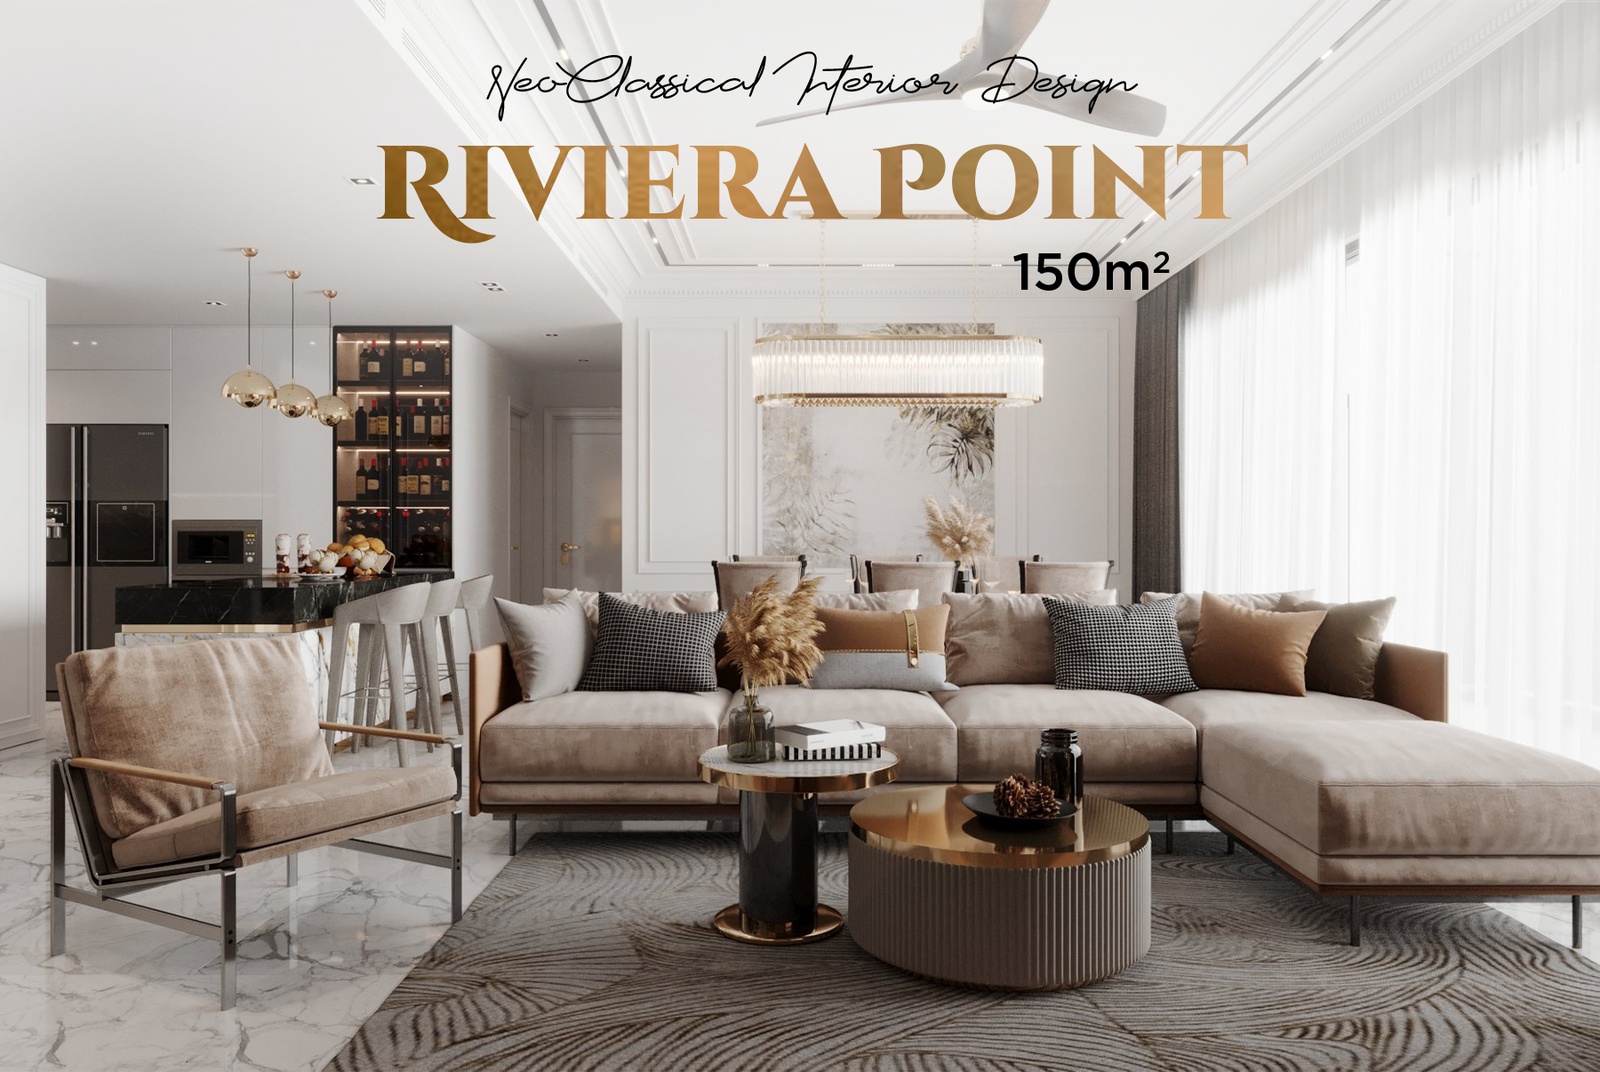 The View Riviera Point 150m2